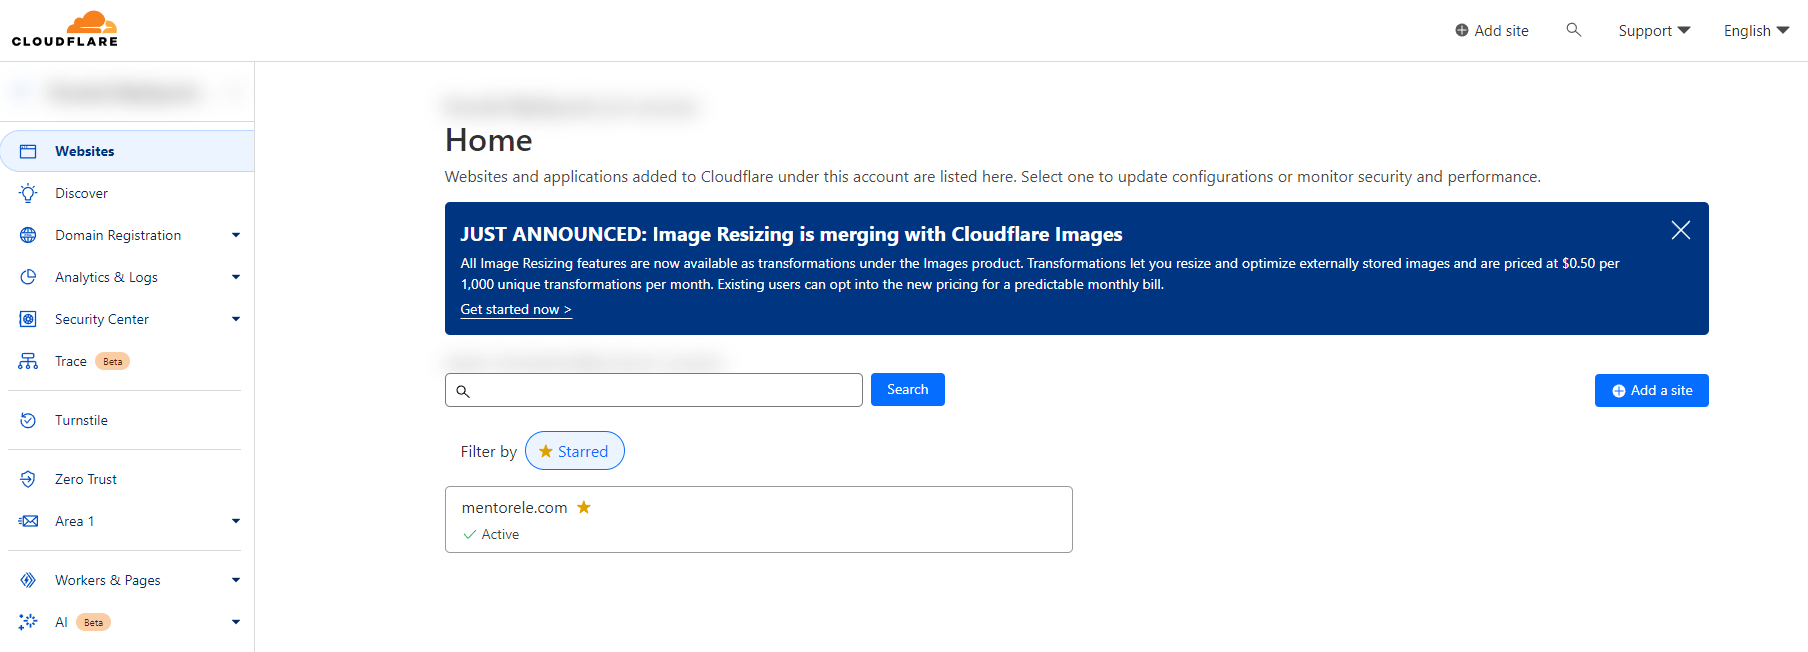 Cloudflare dashboard with image resizing update notice.